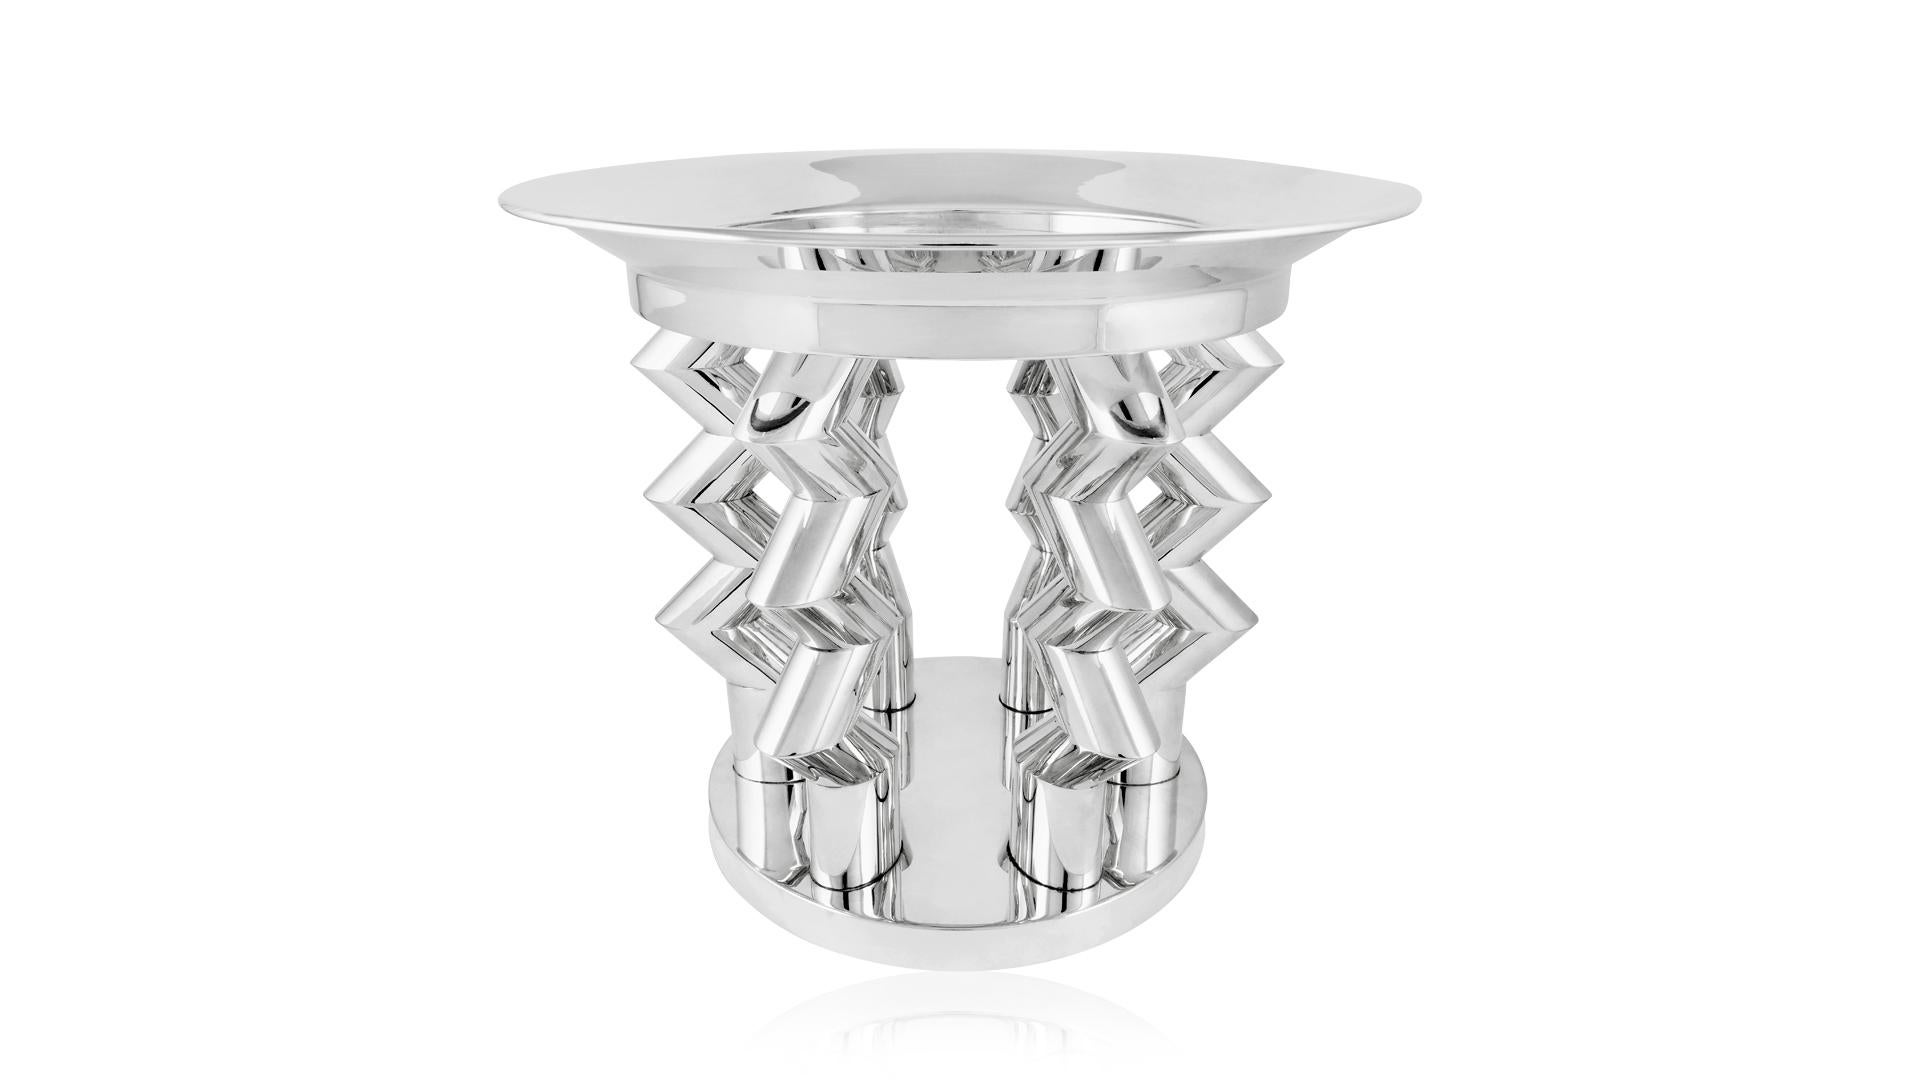 Modern 800 silver centrepiece designed by Ettore Sottsass in 1982 and produced by Rossi & Arcandi for the Memphis Design Group of Milan, Italy. Ettore Sotsass was educated as an architect at the Turin Polytechnic in 1939. He made his name working as